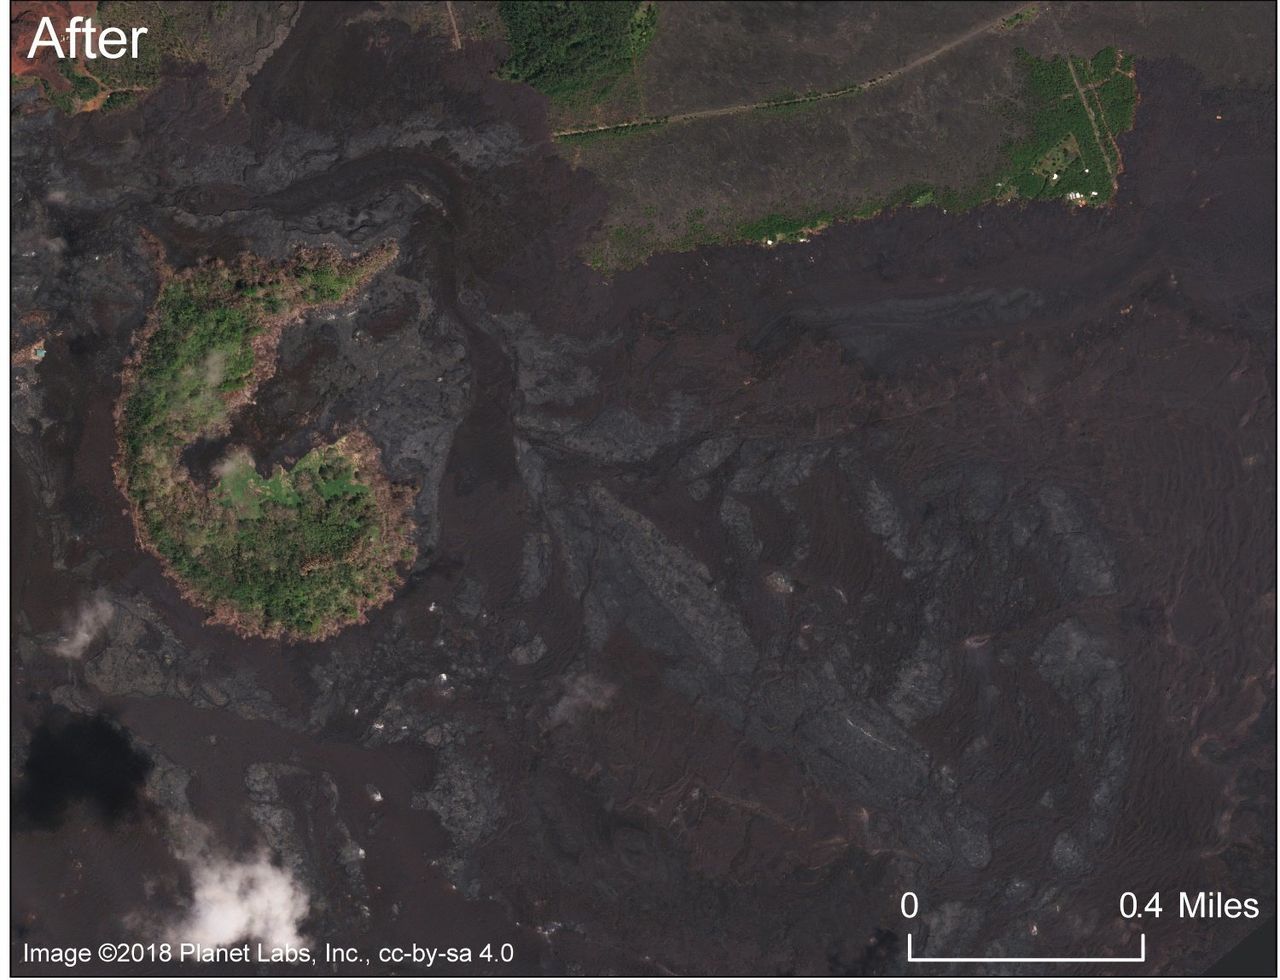 A comparable photo after most of the neighborhood was covered by the fissure 8 lava flow.